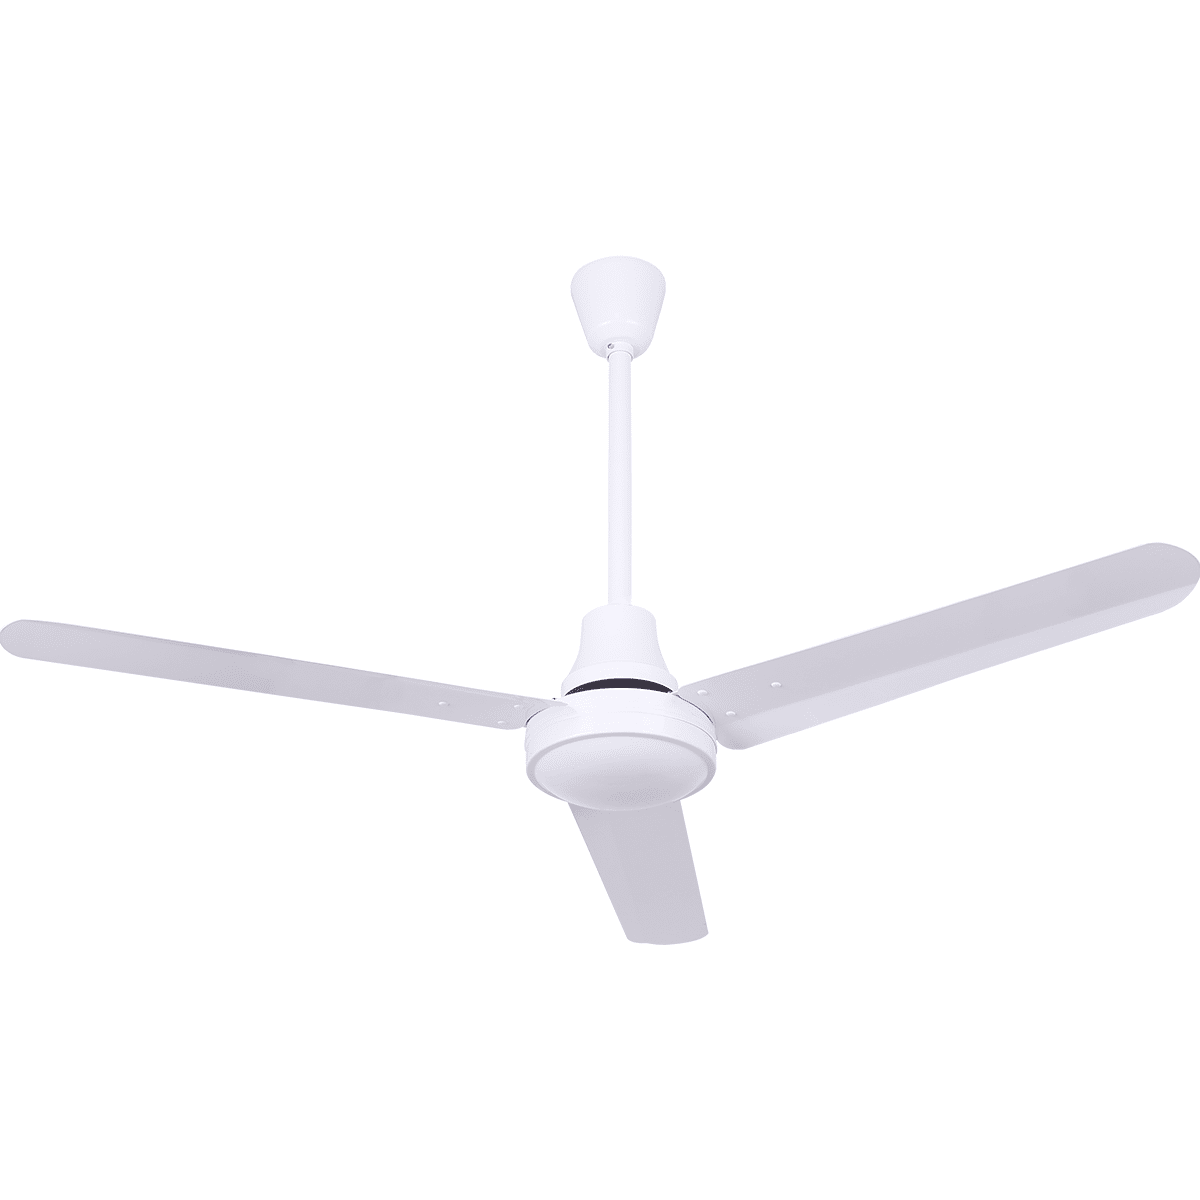 Canarm High Performance DC Industrial Fan - 56-in. White